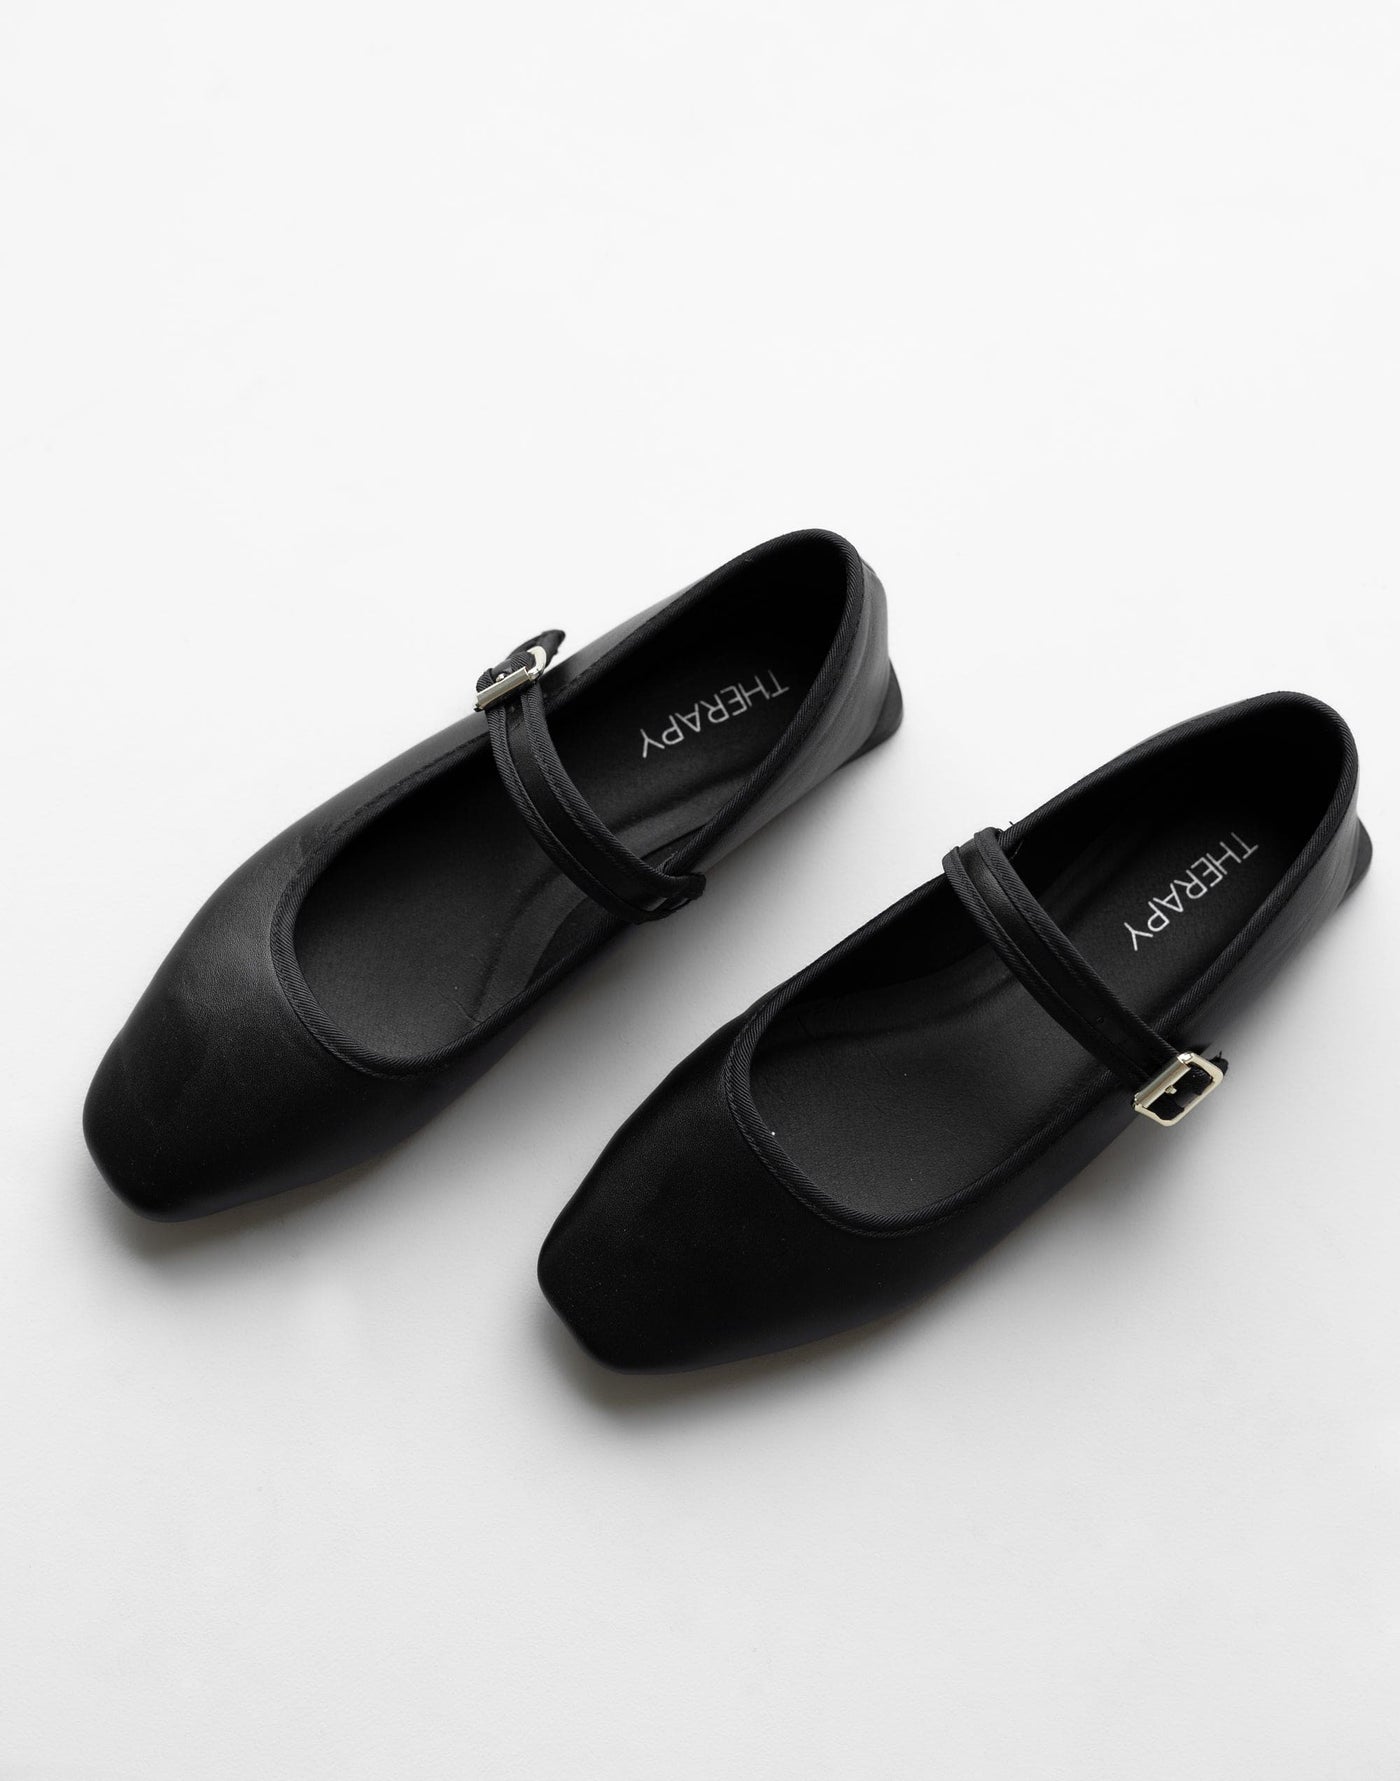 Faze Ballet Flat (Black Smooth PU) - By Therapy - Upper Strap Detail Simple Flats - Women's Shoes - Charcoal Clothing